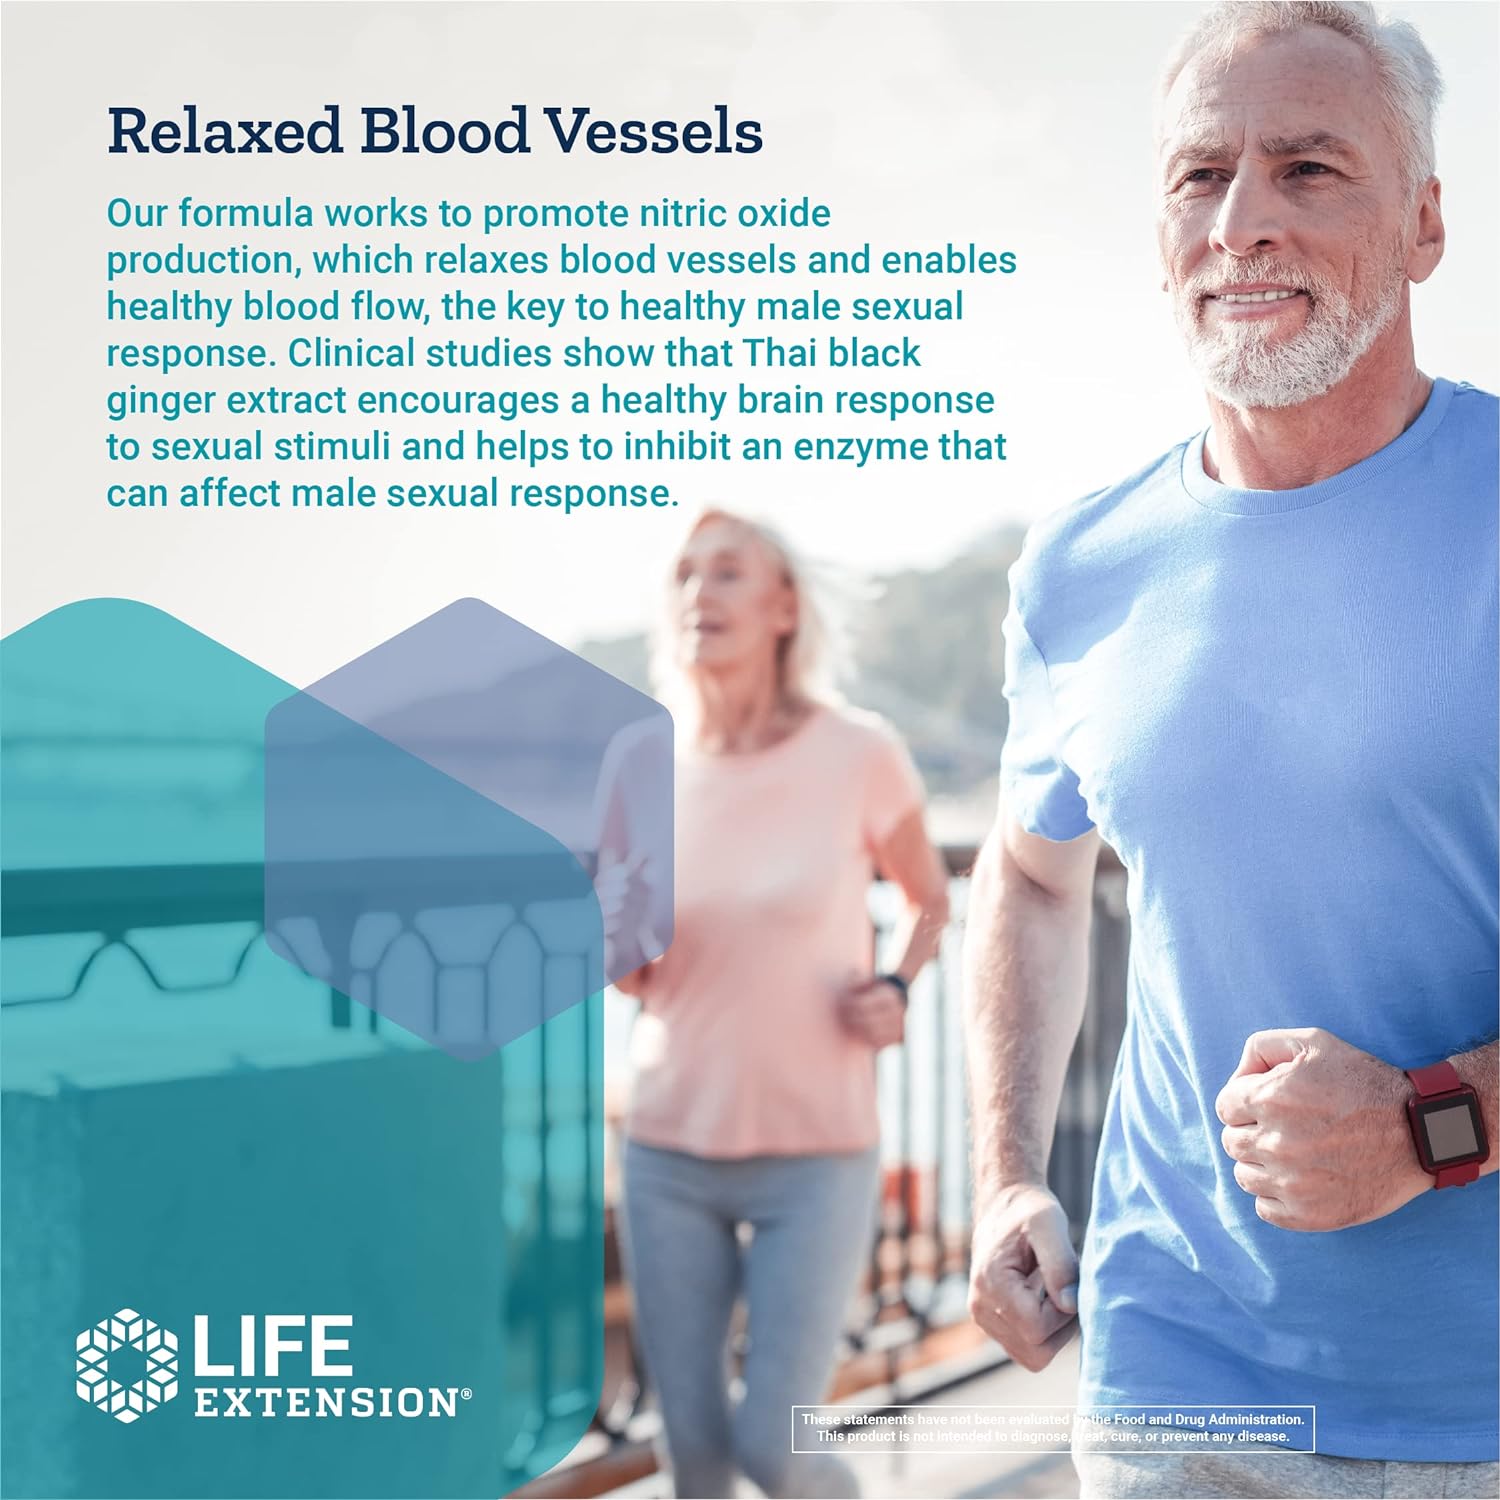 Image explaining relaxed blood vessels - a 'how this works' approach